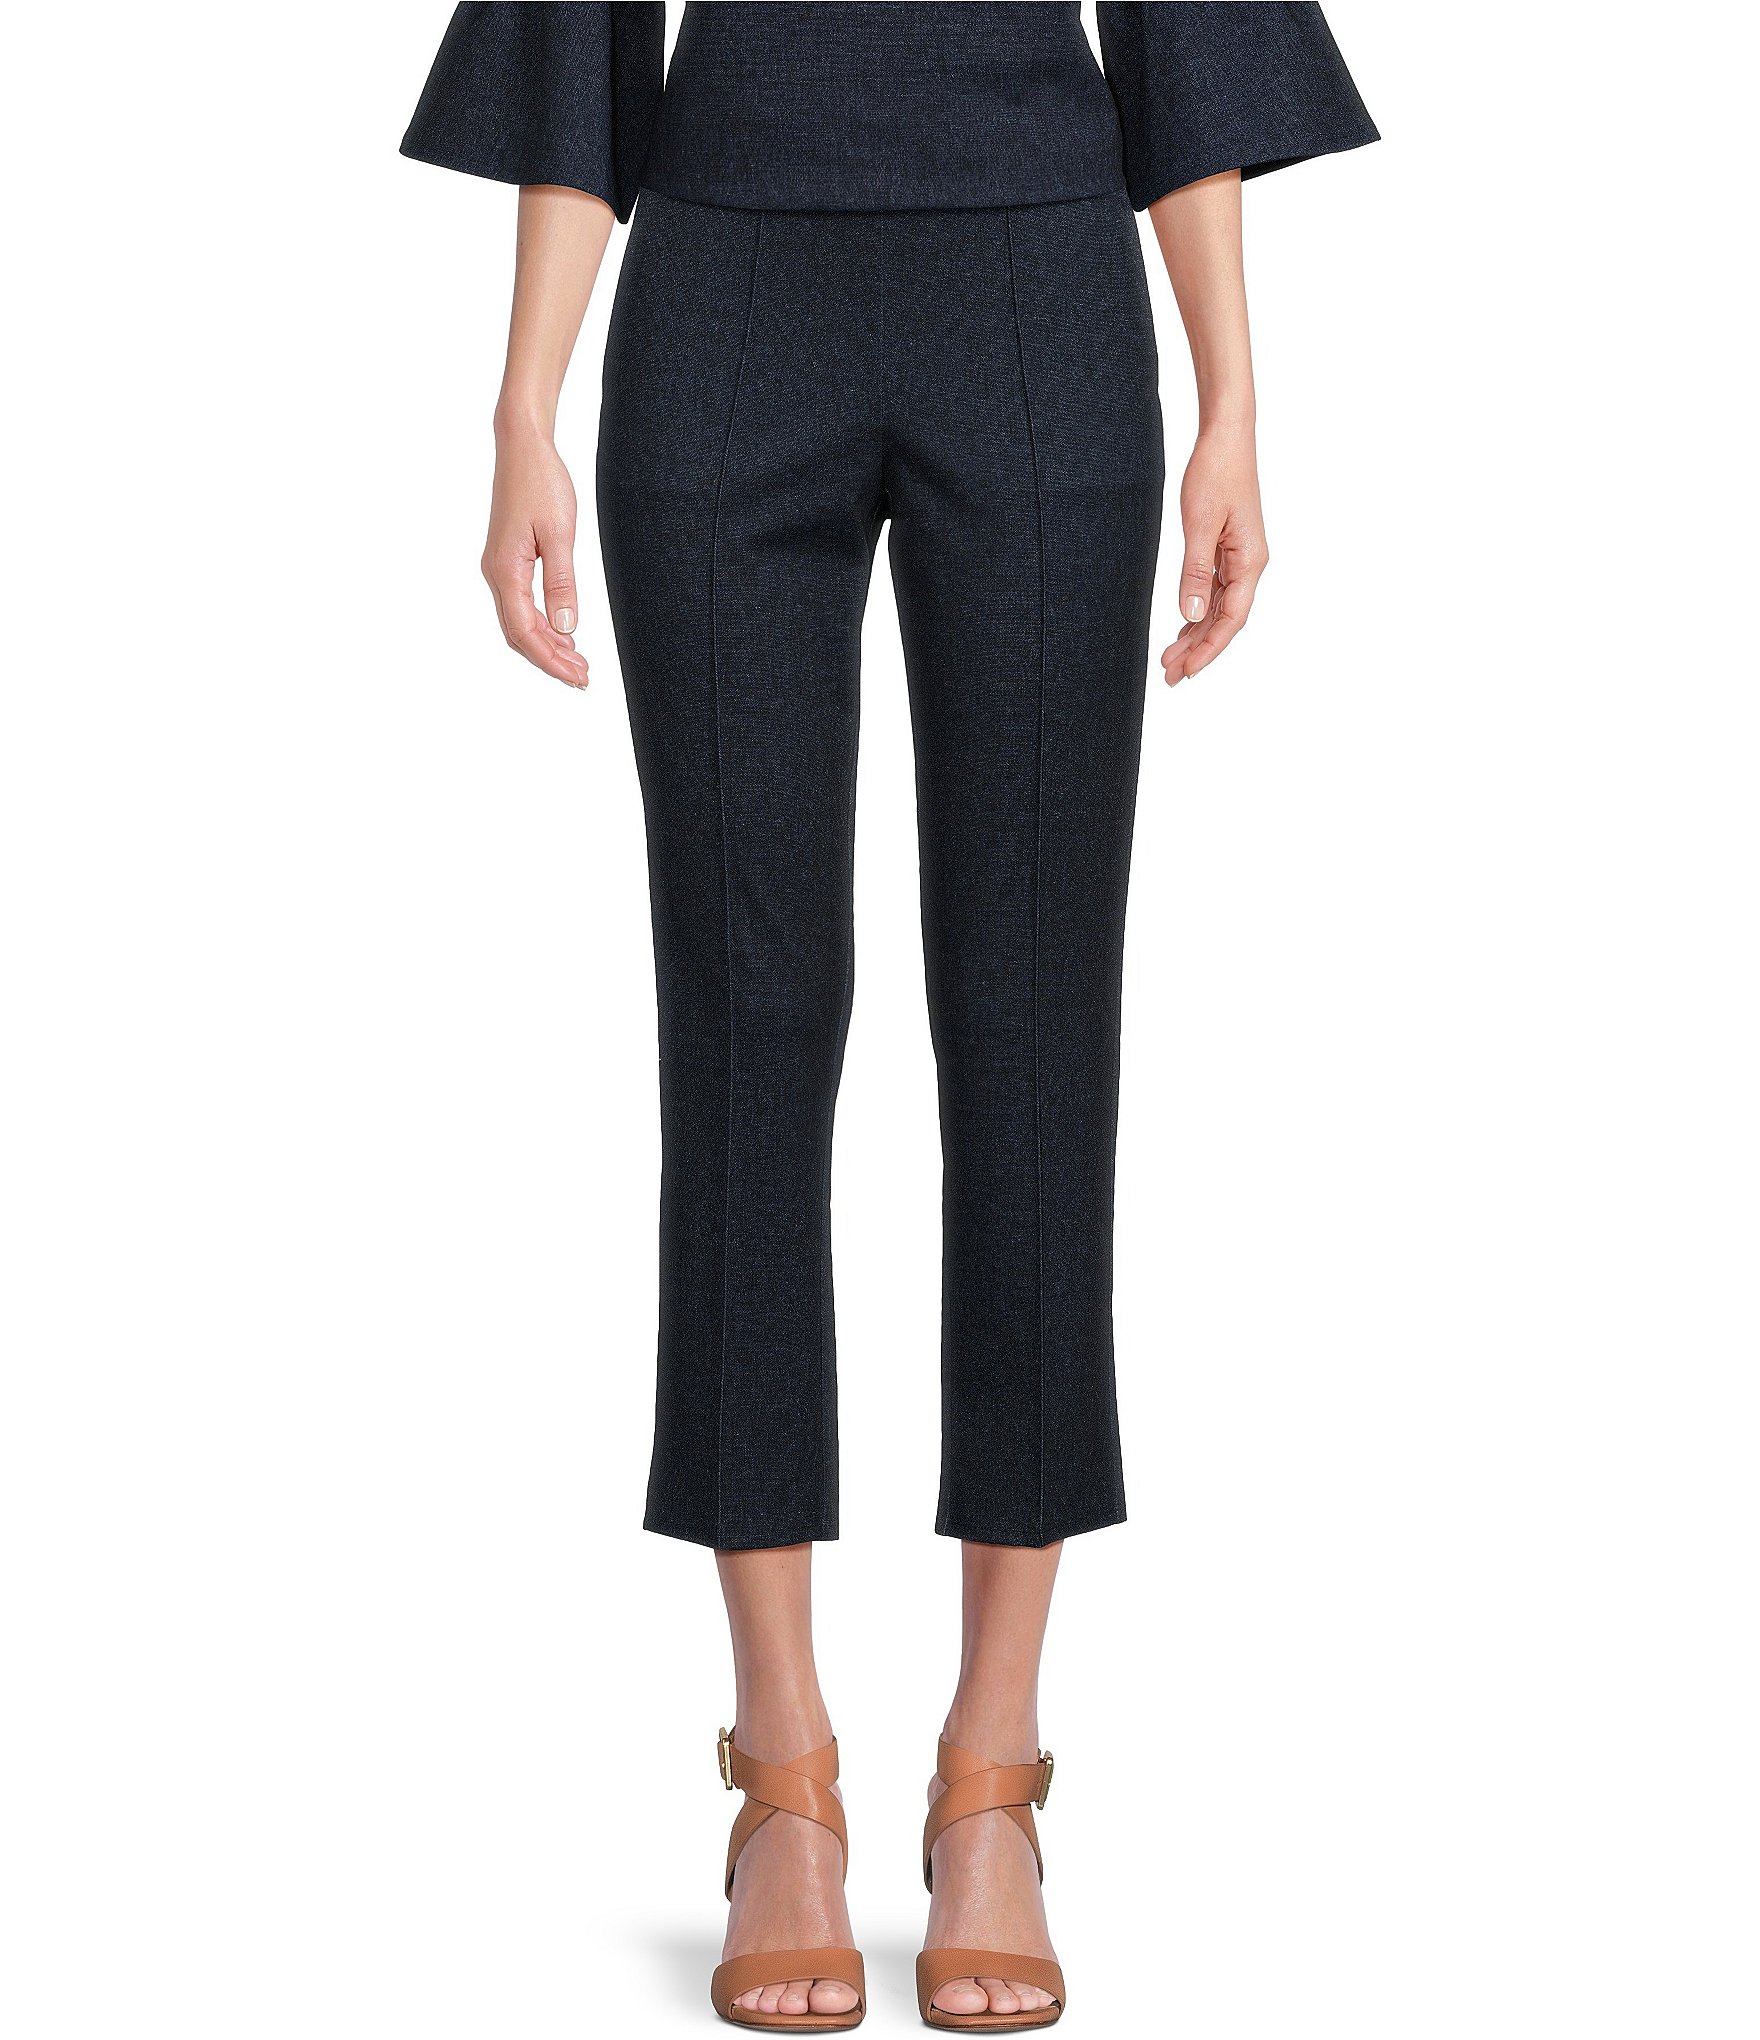 Marks & Spencer Autograph Wool Blend Slim Leg Cropped Trousers — UFO No More